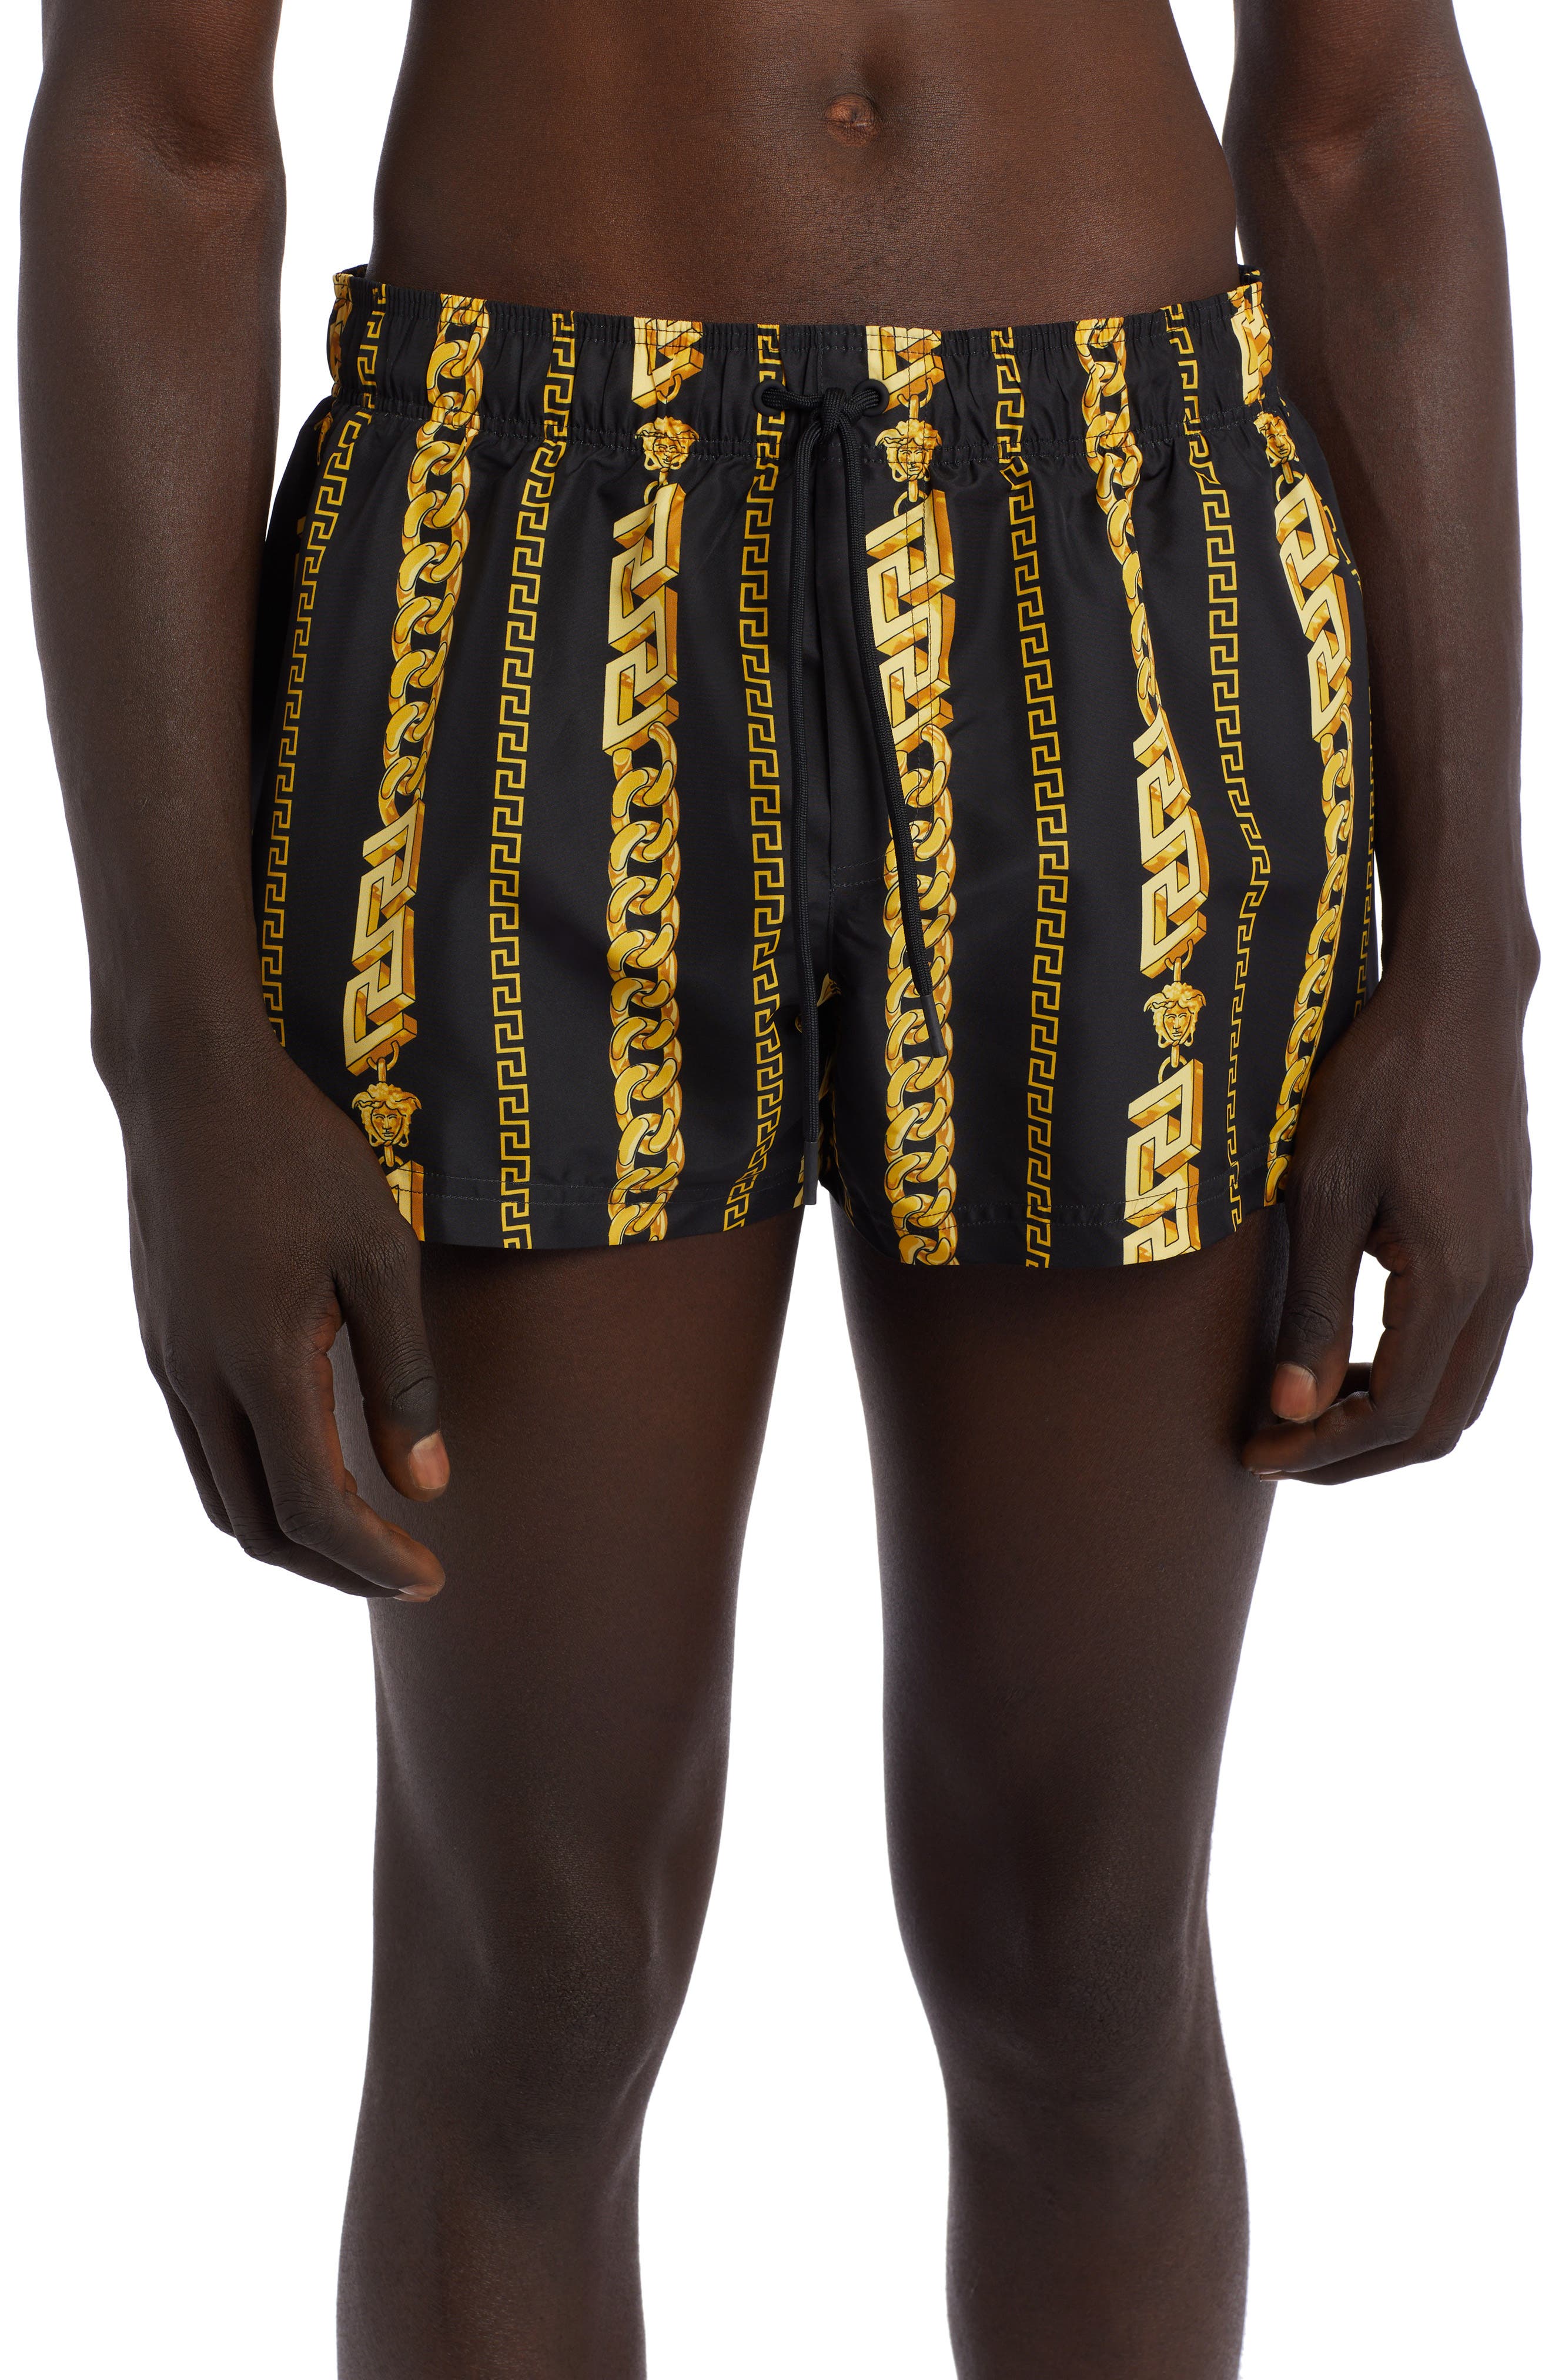 Versace Chain Print Swim Trunks in Black Gold at Nordstrom, Size 3 Us